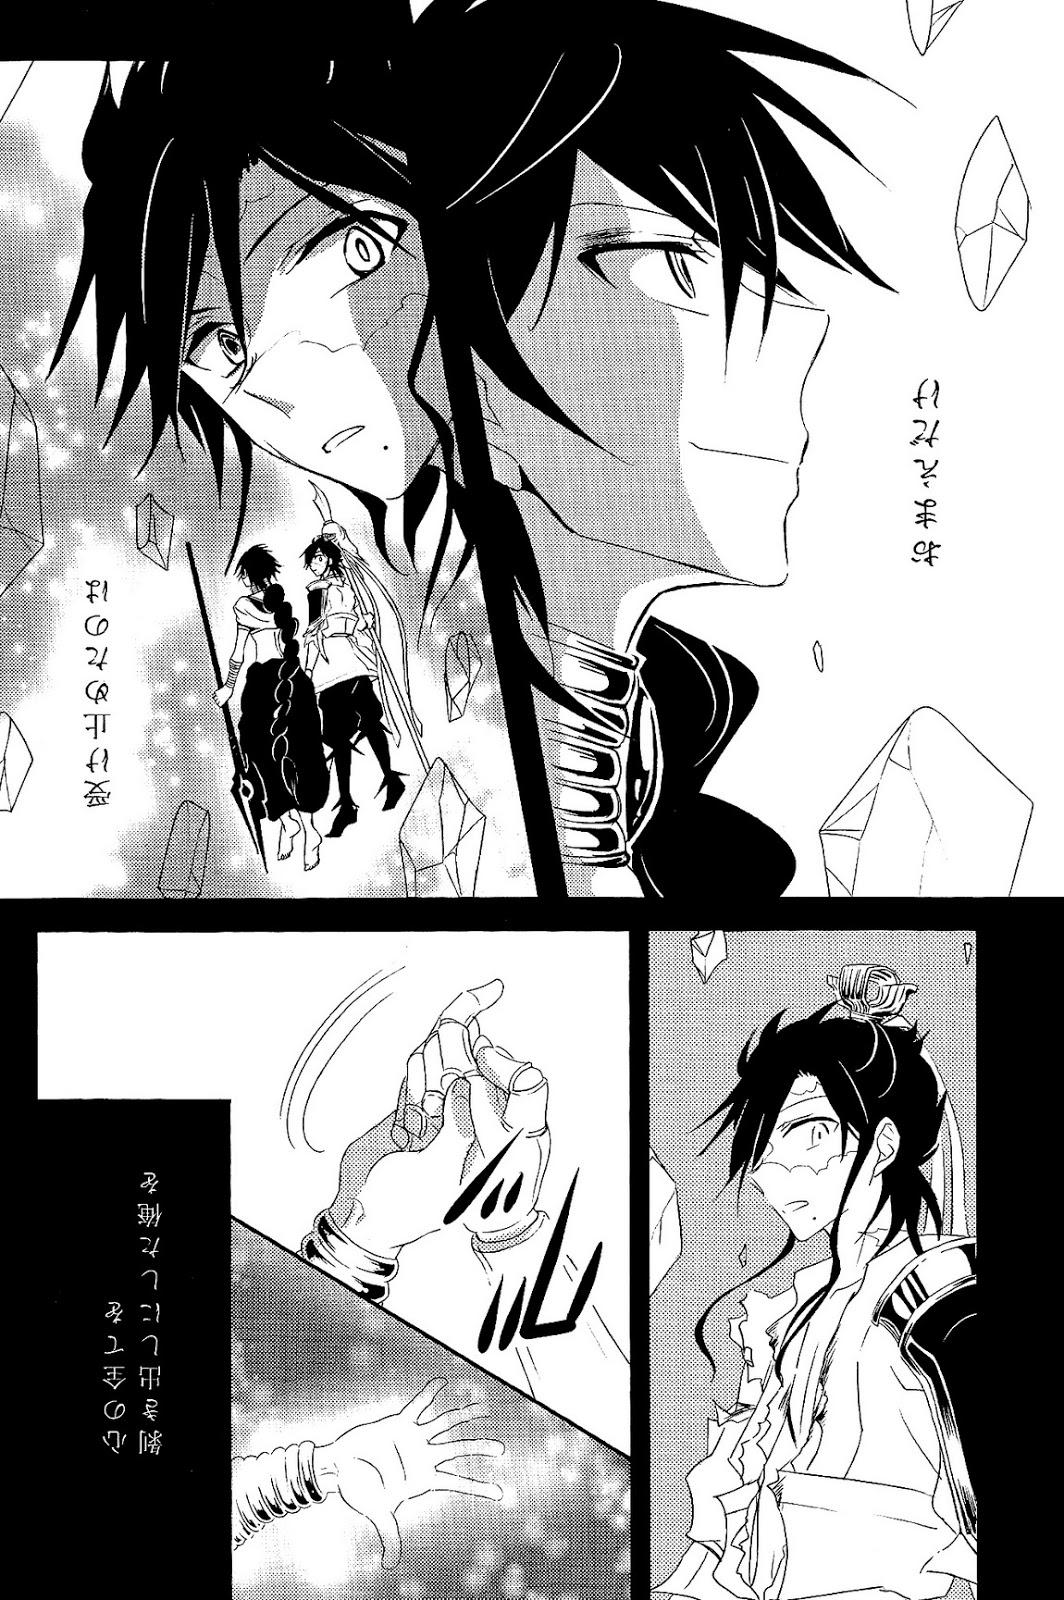 Straight Porn One after another ―Are Ato ni Saku Hana― - Magi the labyrinth of magic Stepbrother - Page 4